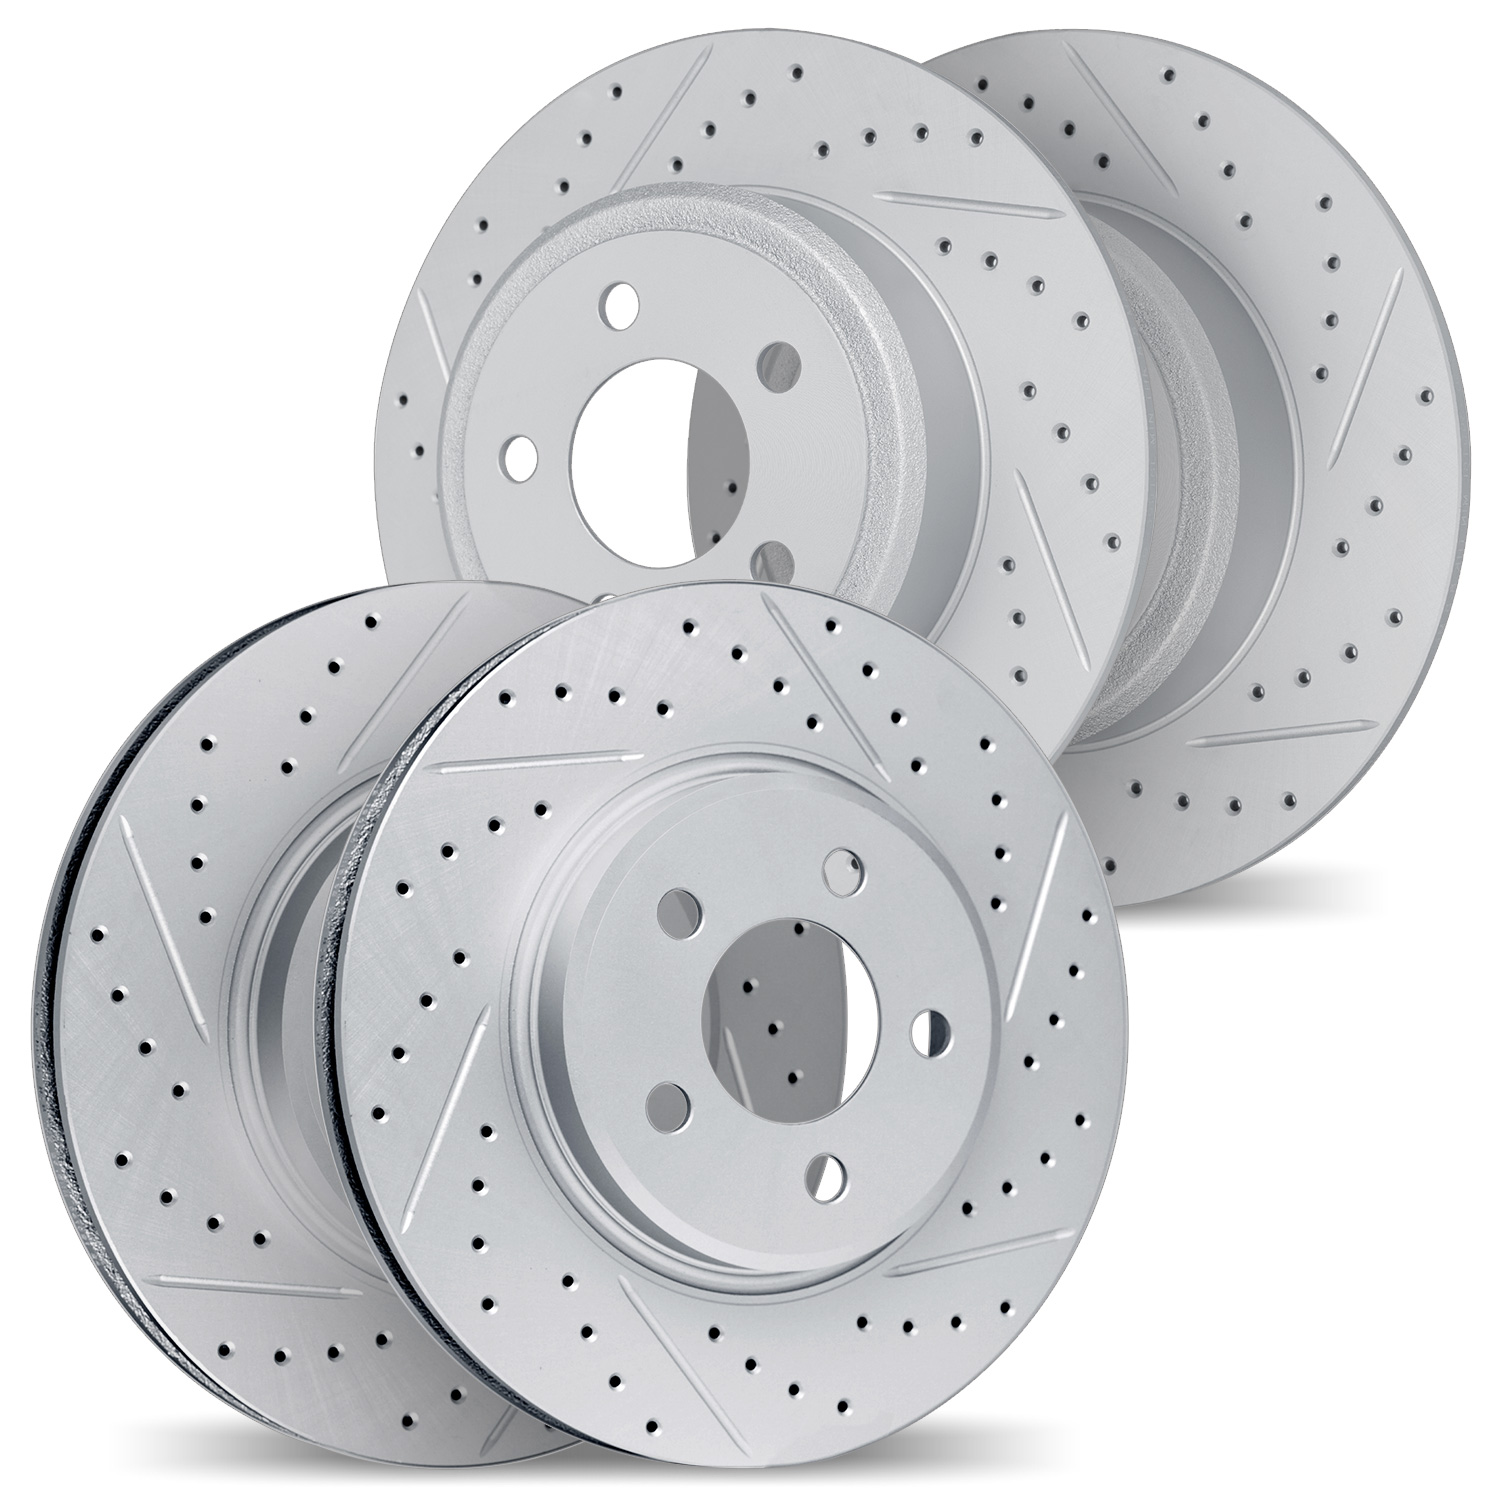 2004-67050 Geoperformance Drilled/Slotted Brake Rotors, 2004-2005 Infiniti/Nissan, Position: Front and Rear